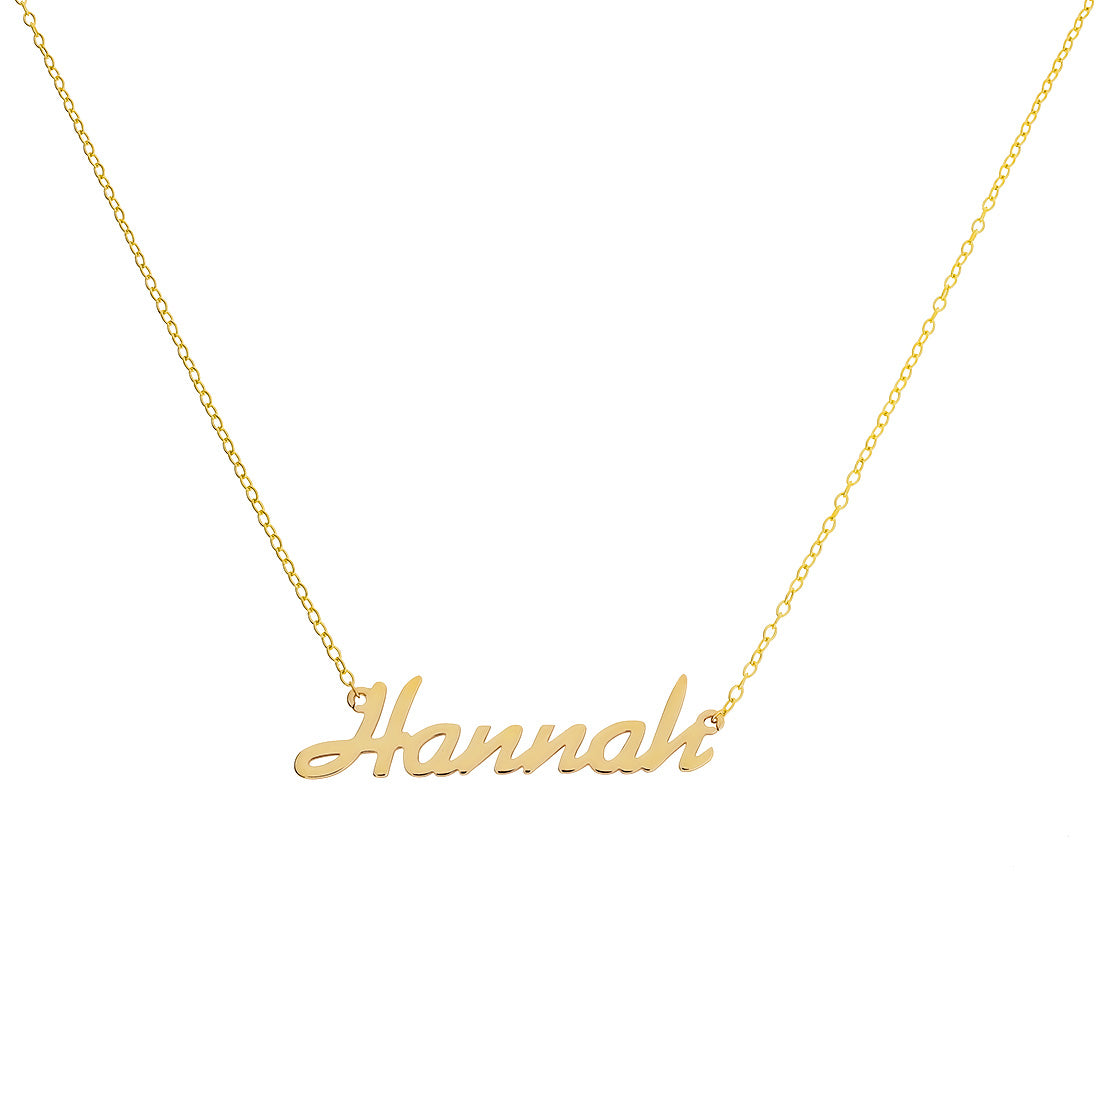 Personalised Name Necklace - Made to Order